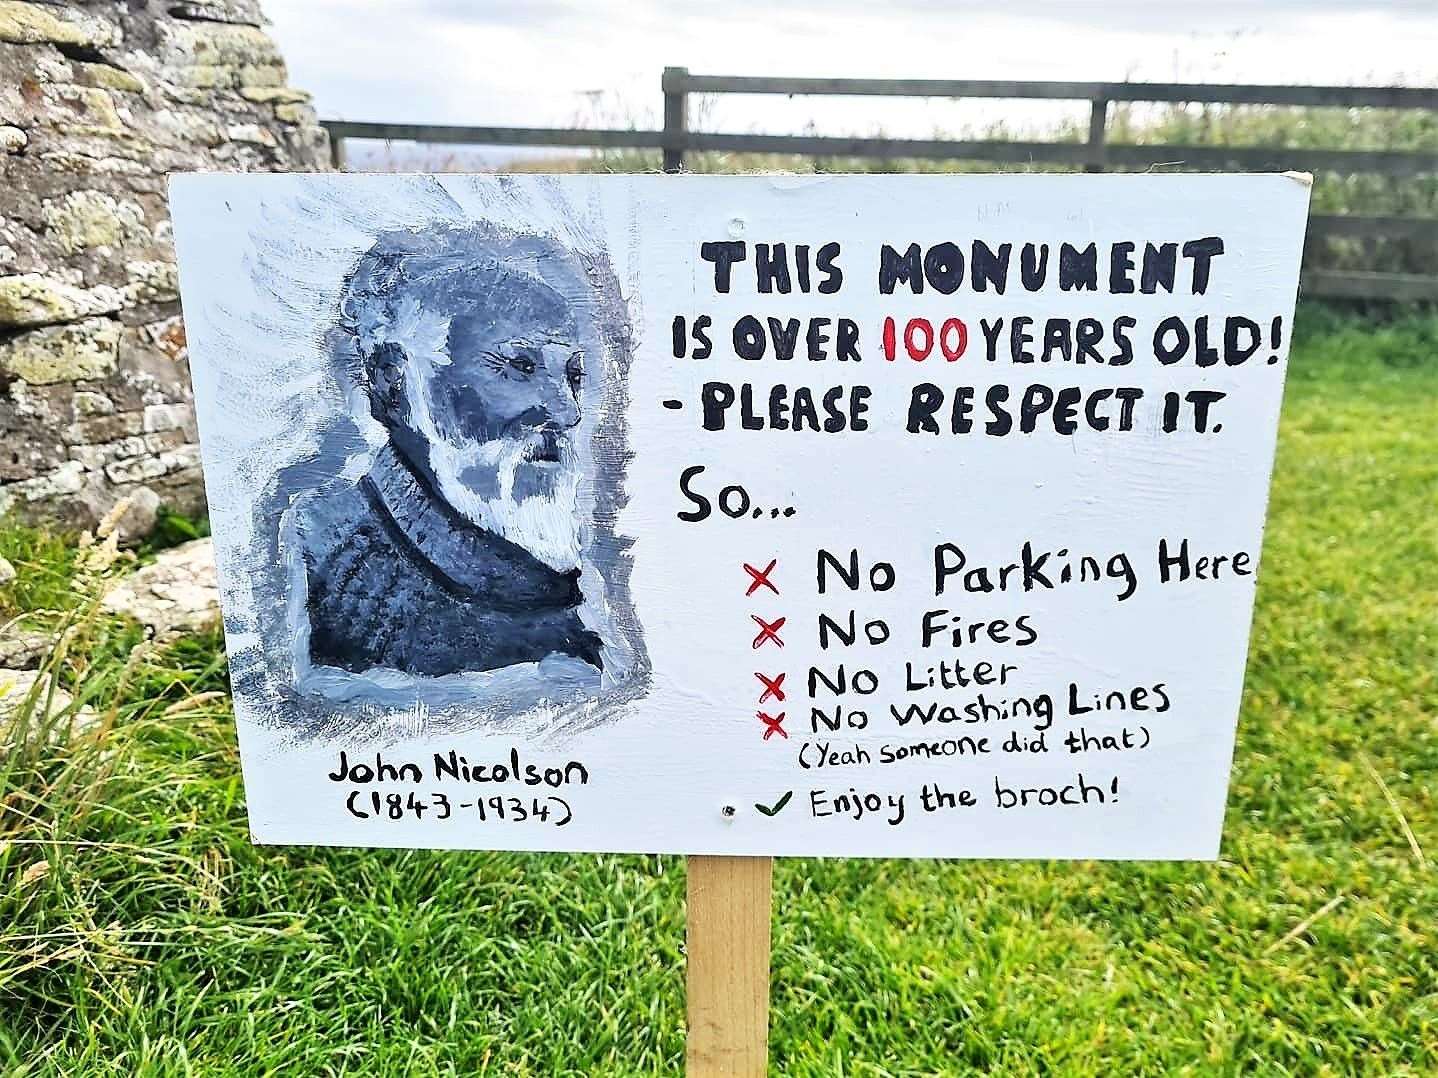 A customised notice was fashioned by Caithness Broch Project volunteers to warn against disrespectful behaviour around the Nicolson monument and adjacent broch at Nybster in the Auckengill area.